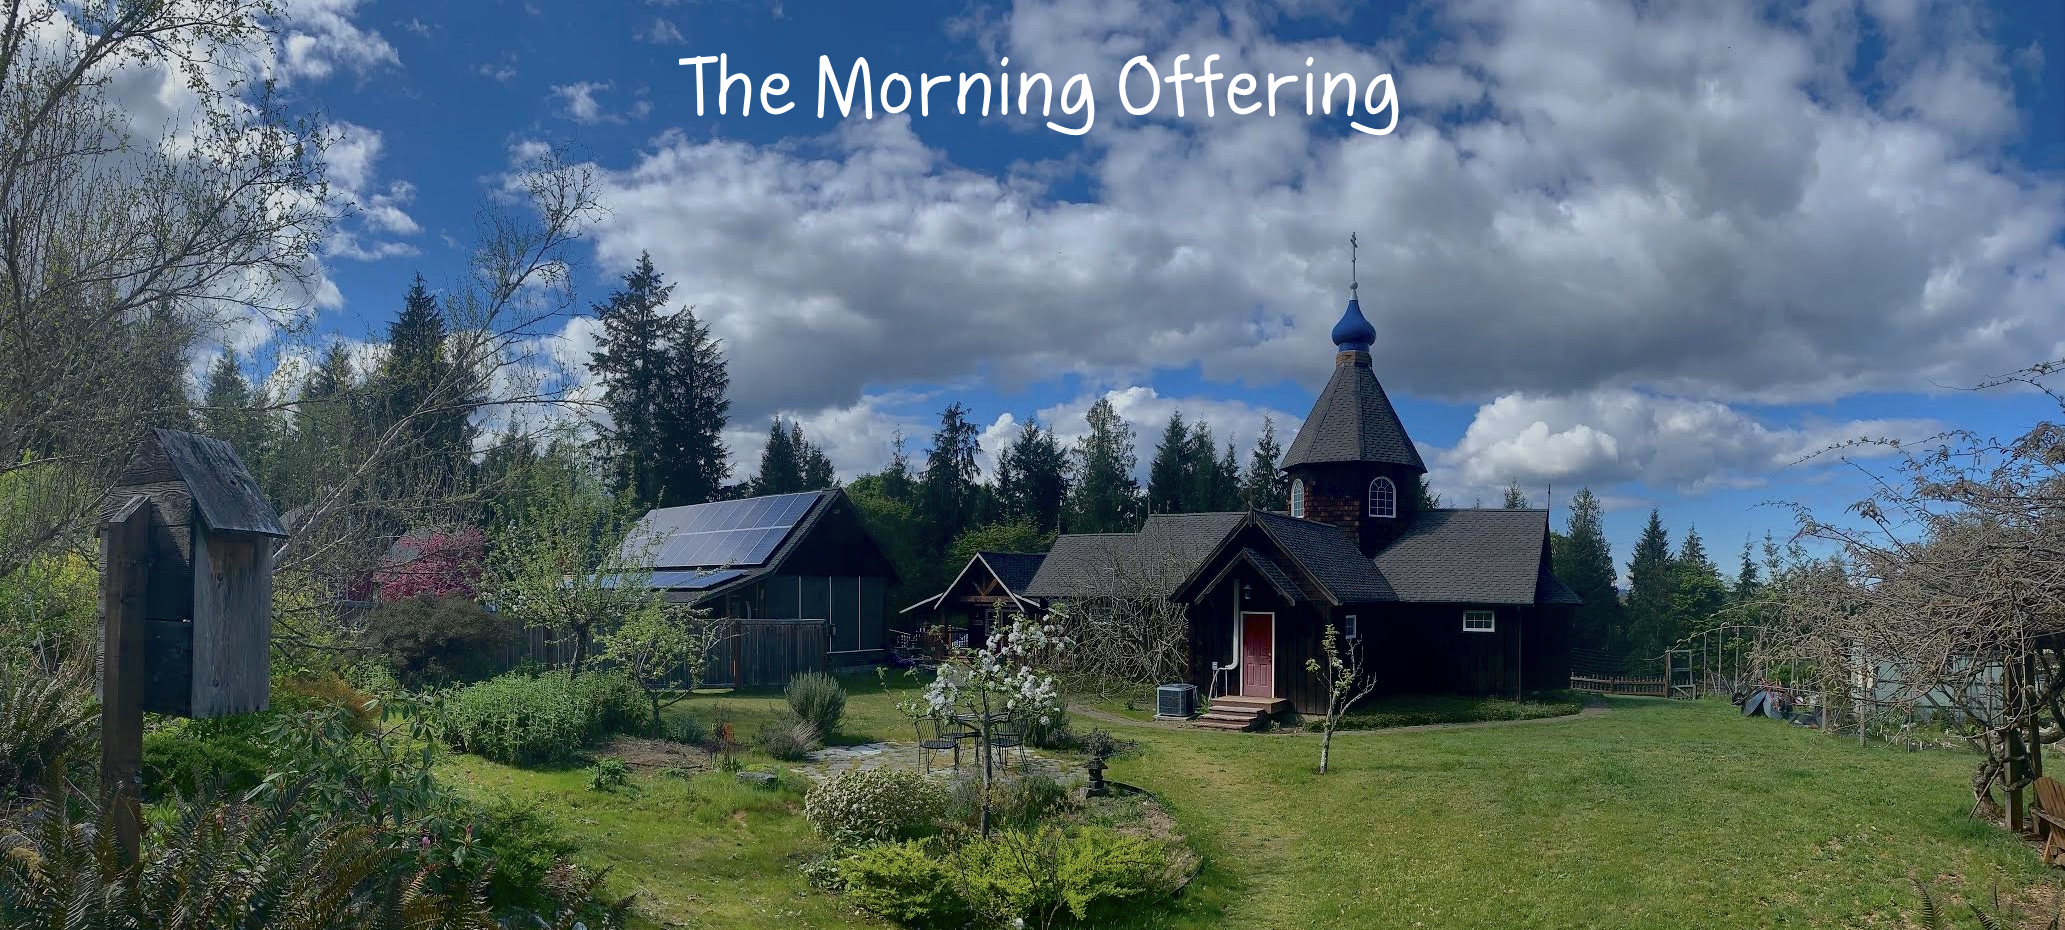 The Morning Offering